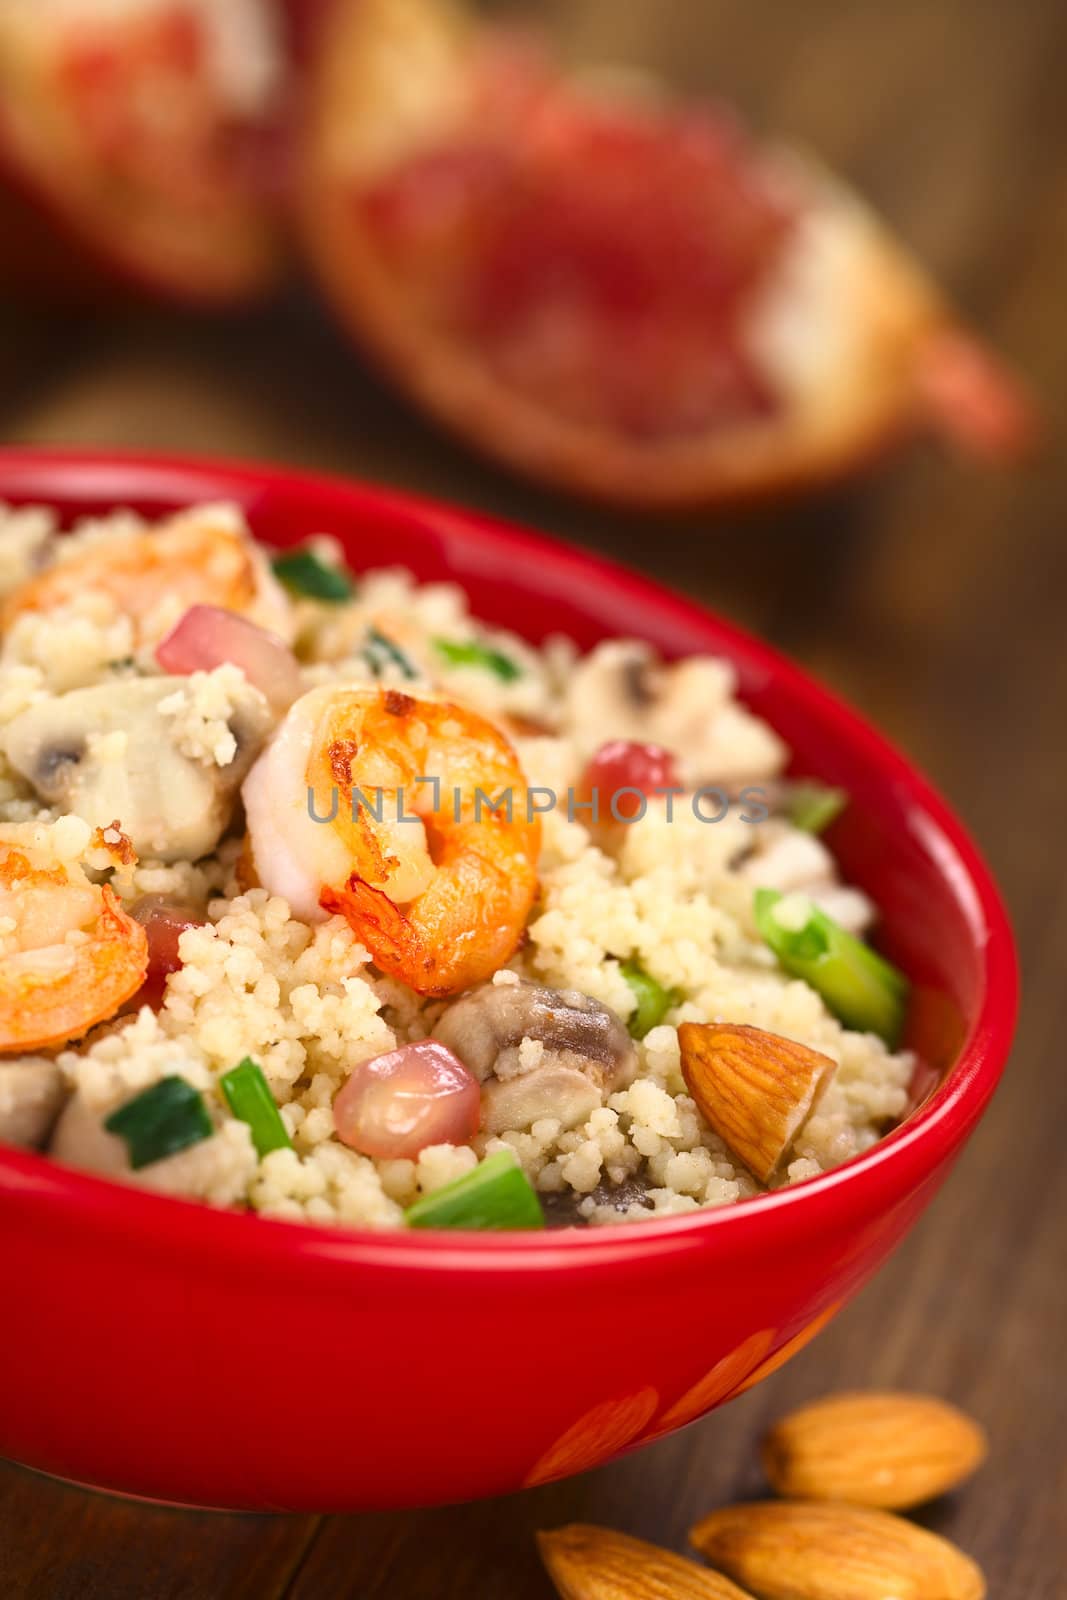 Couscous dish with shrimps, mushroom, almond, pomegranate seeds and green onion served in red bowl (Selective Focus, Focus on the tail of the shrimp on the top of the meal) 